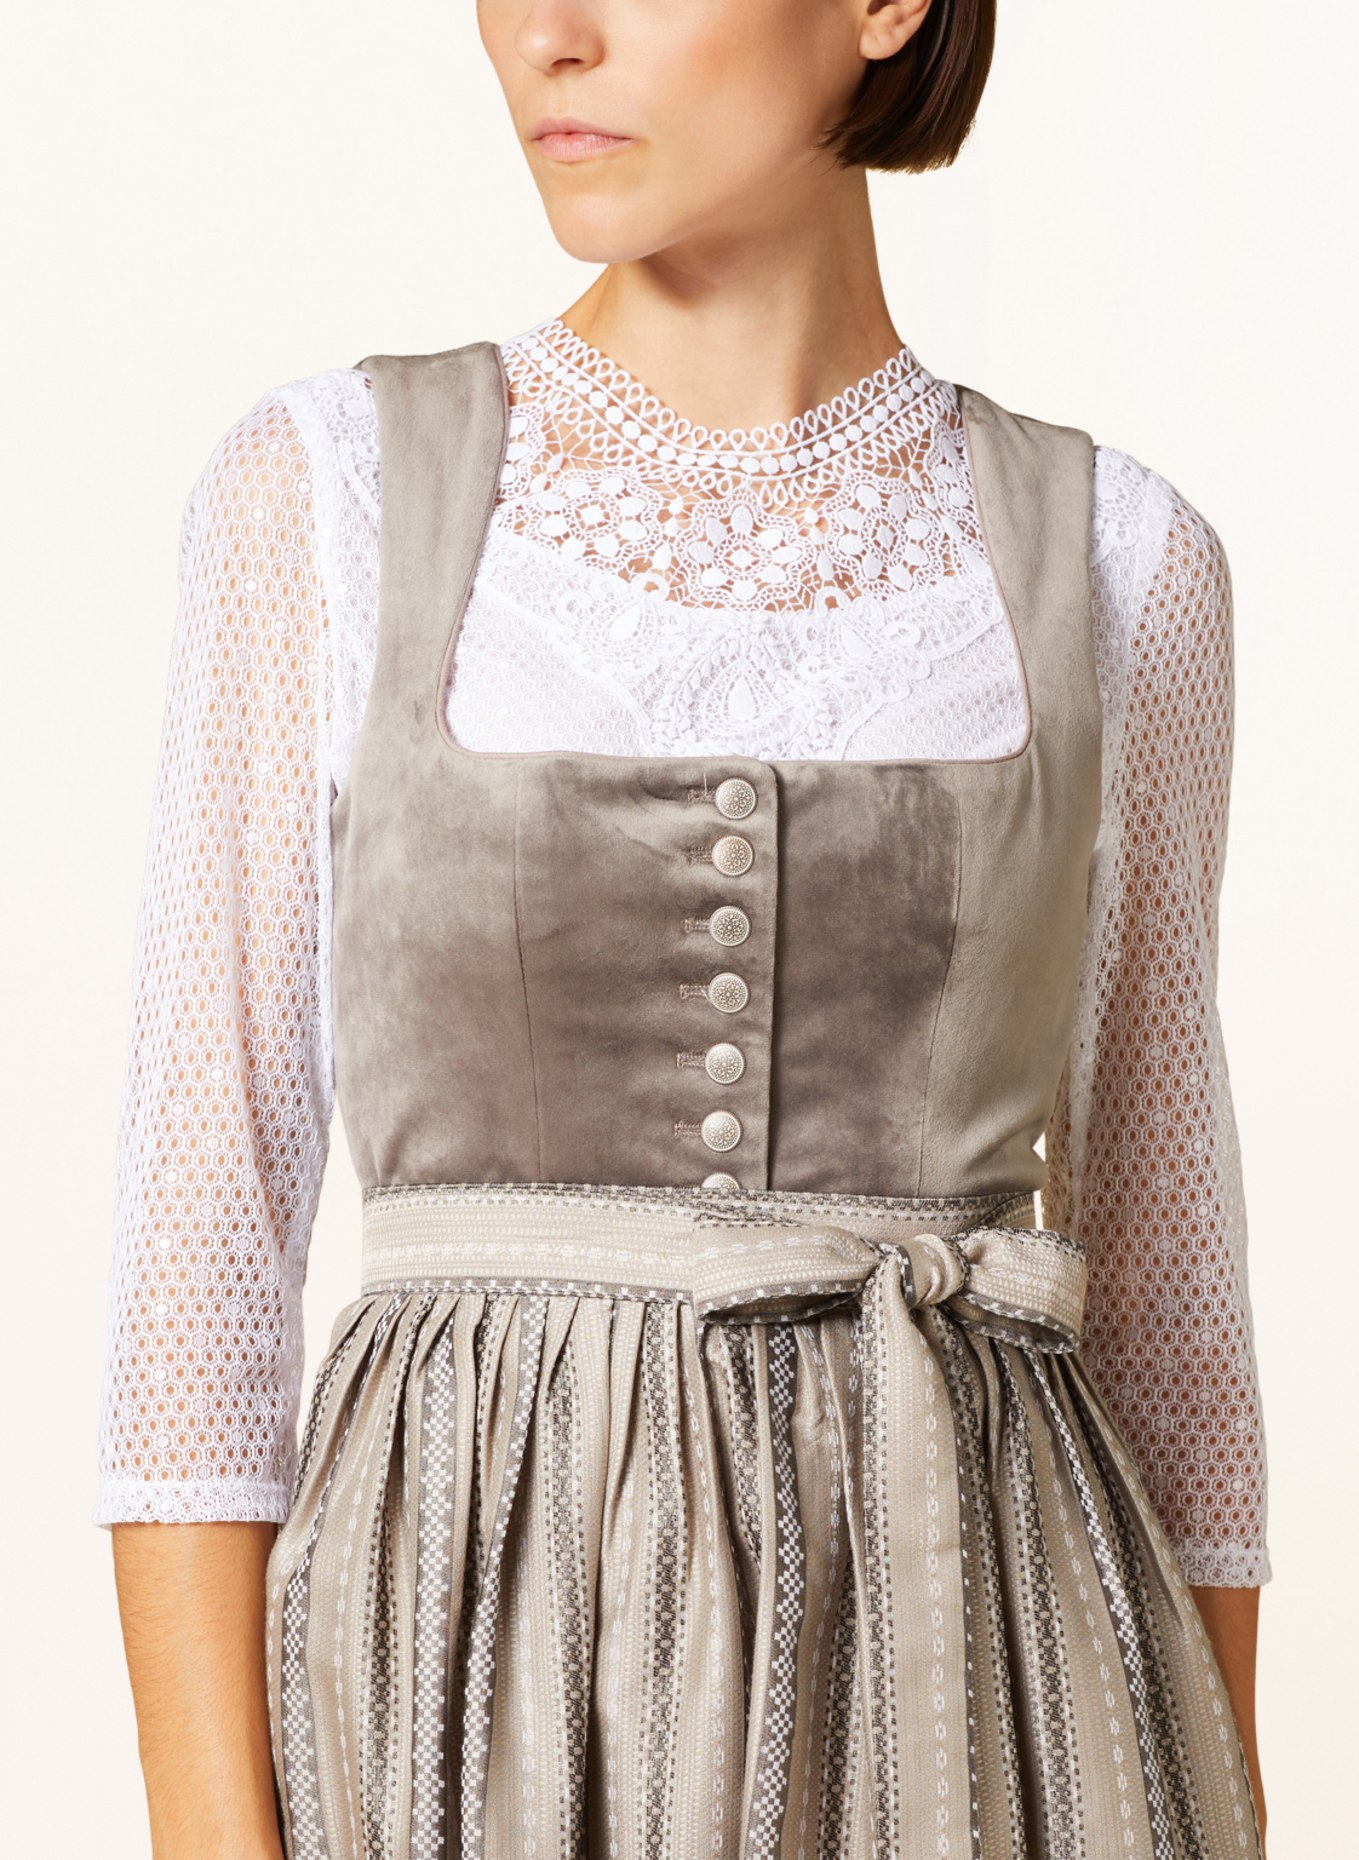 WALDORFF Dirndl blouse made of crochet lace, Color: WHITE (Image 3)